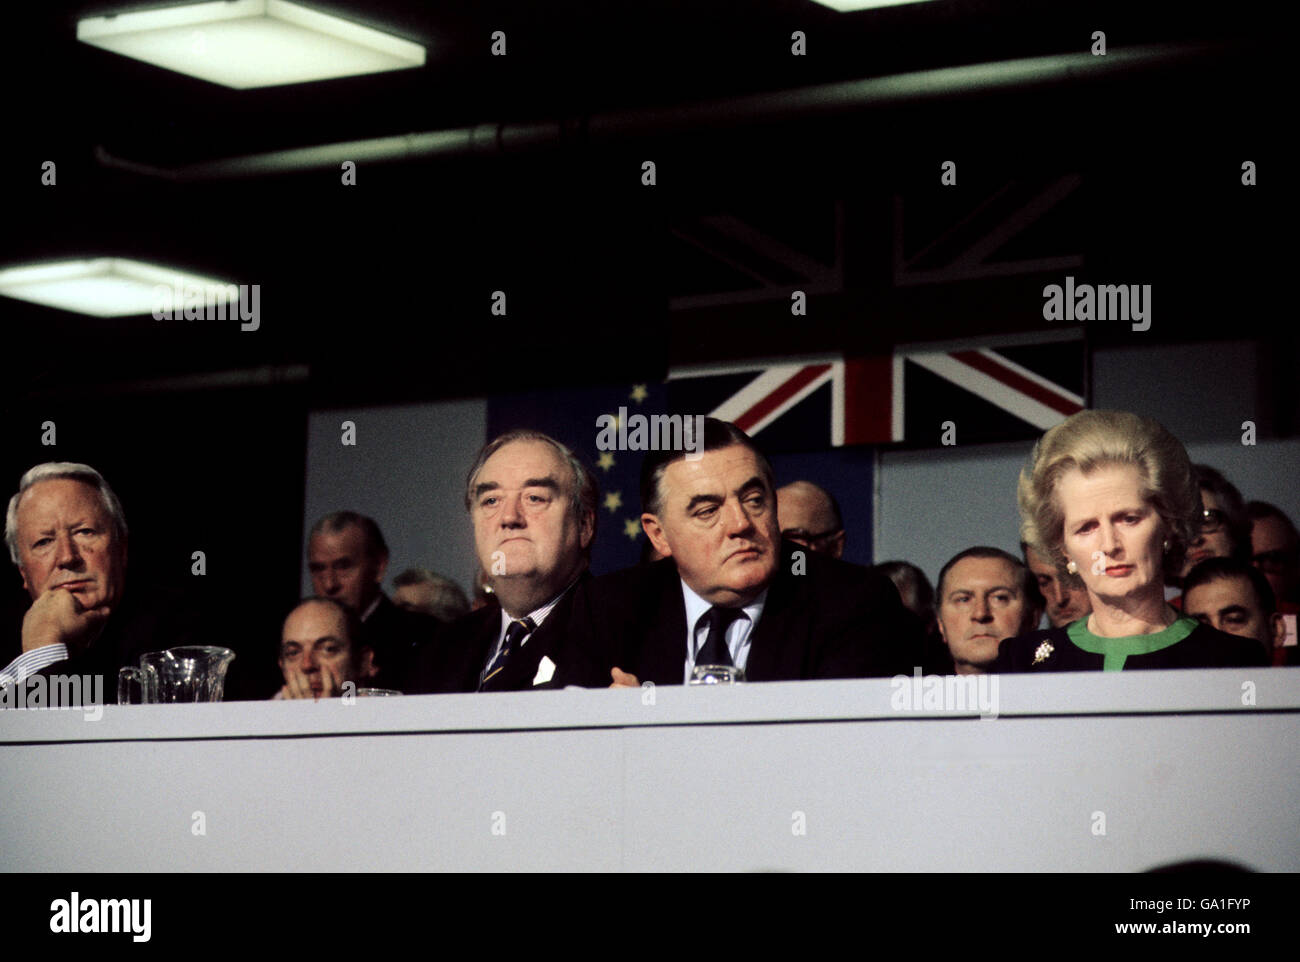 Opposition leader Margaret Thatcher with (from left) former premier, Edward Heath, Deputy leader Willie Whitelaw, and Lord Hewlett during the Conservative Party's annual conference. Stock Photo